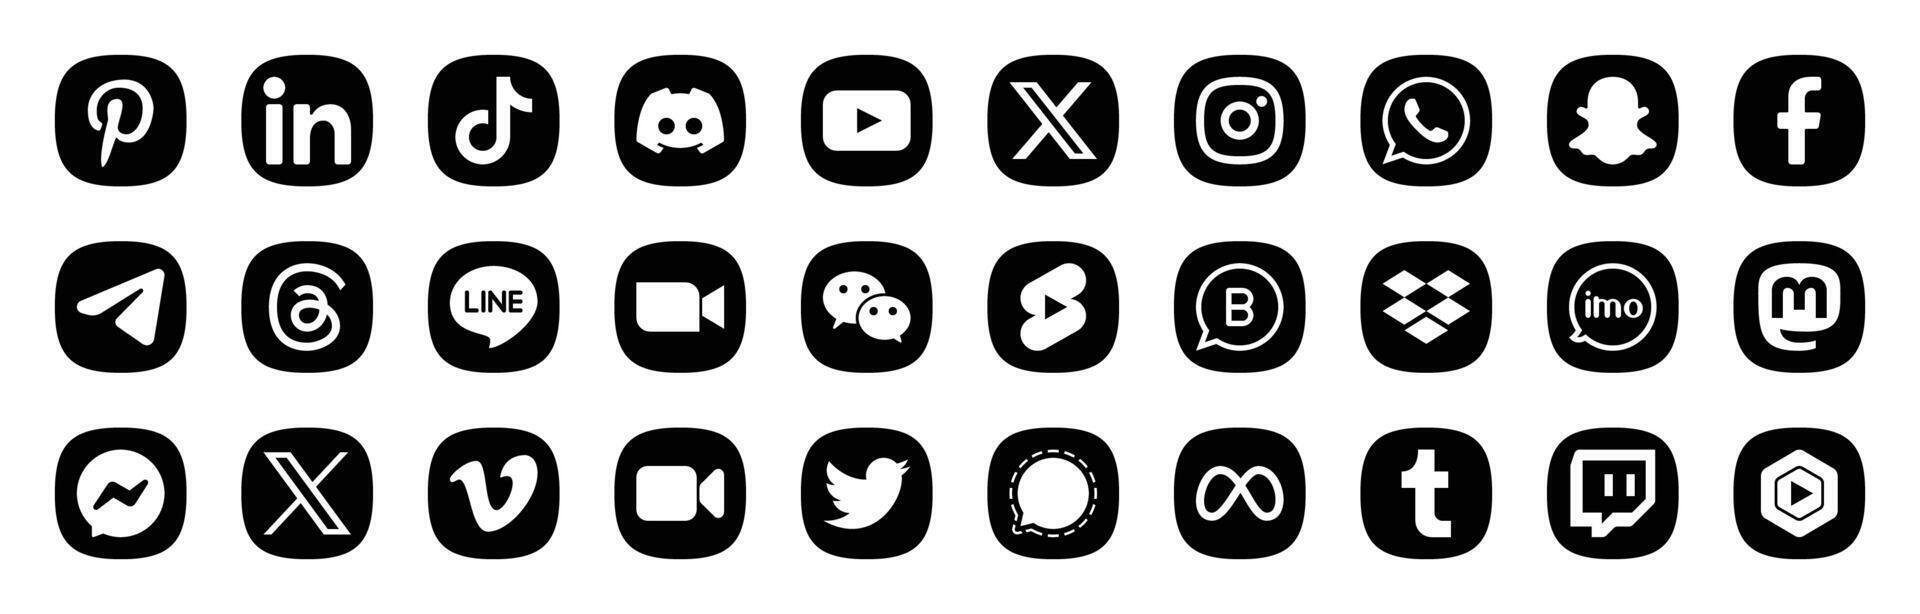 Social Media and Communication Icon Set Logos, Brands, and Messaging Platforms vector